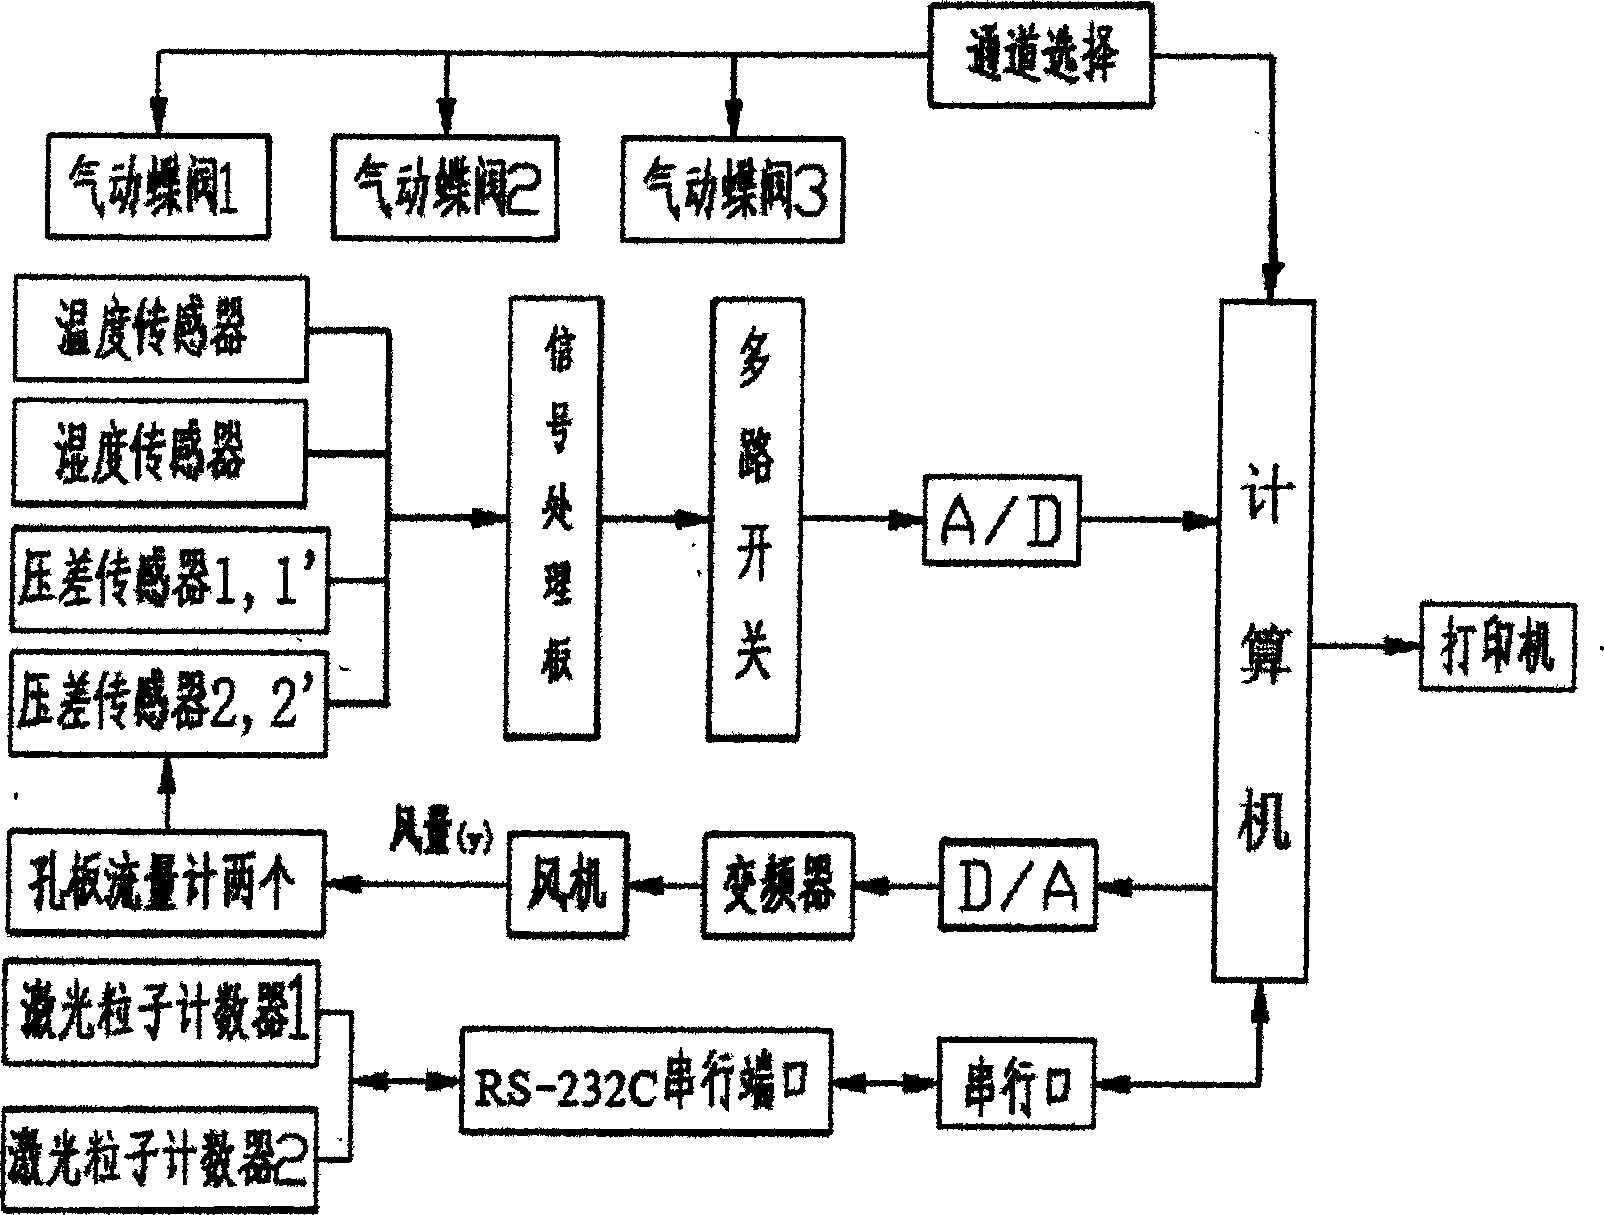 Filter-efficiency inspection system for efficient and super-efficient air filter